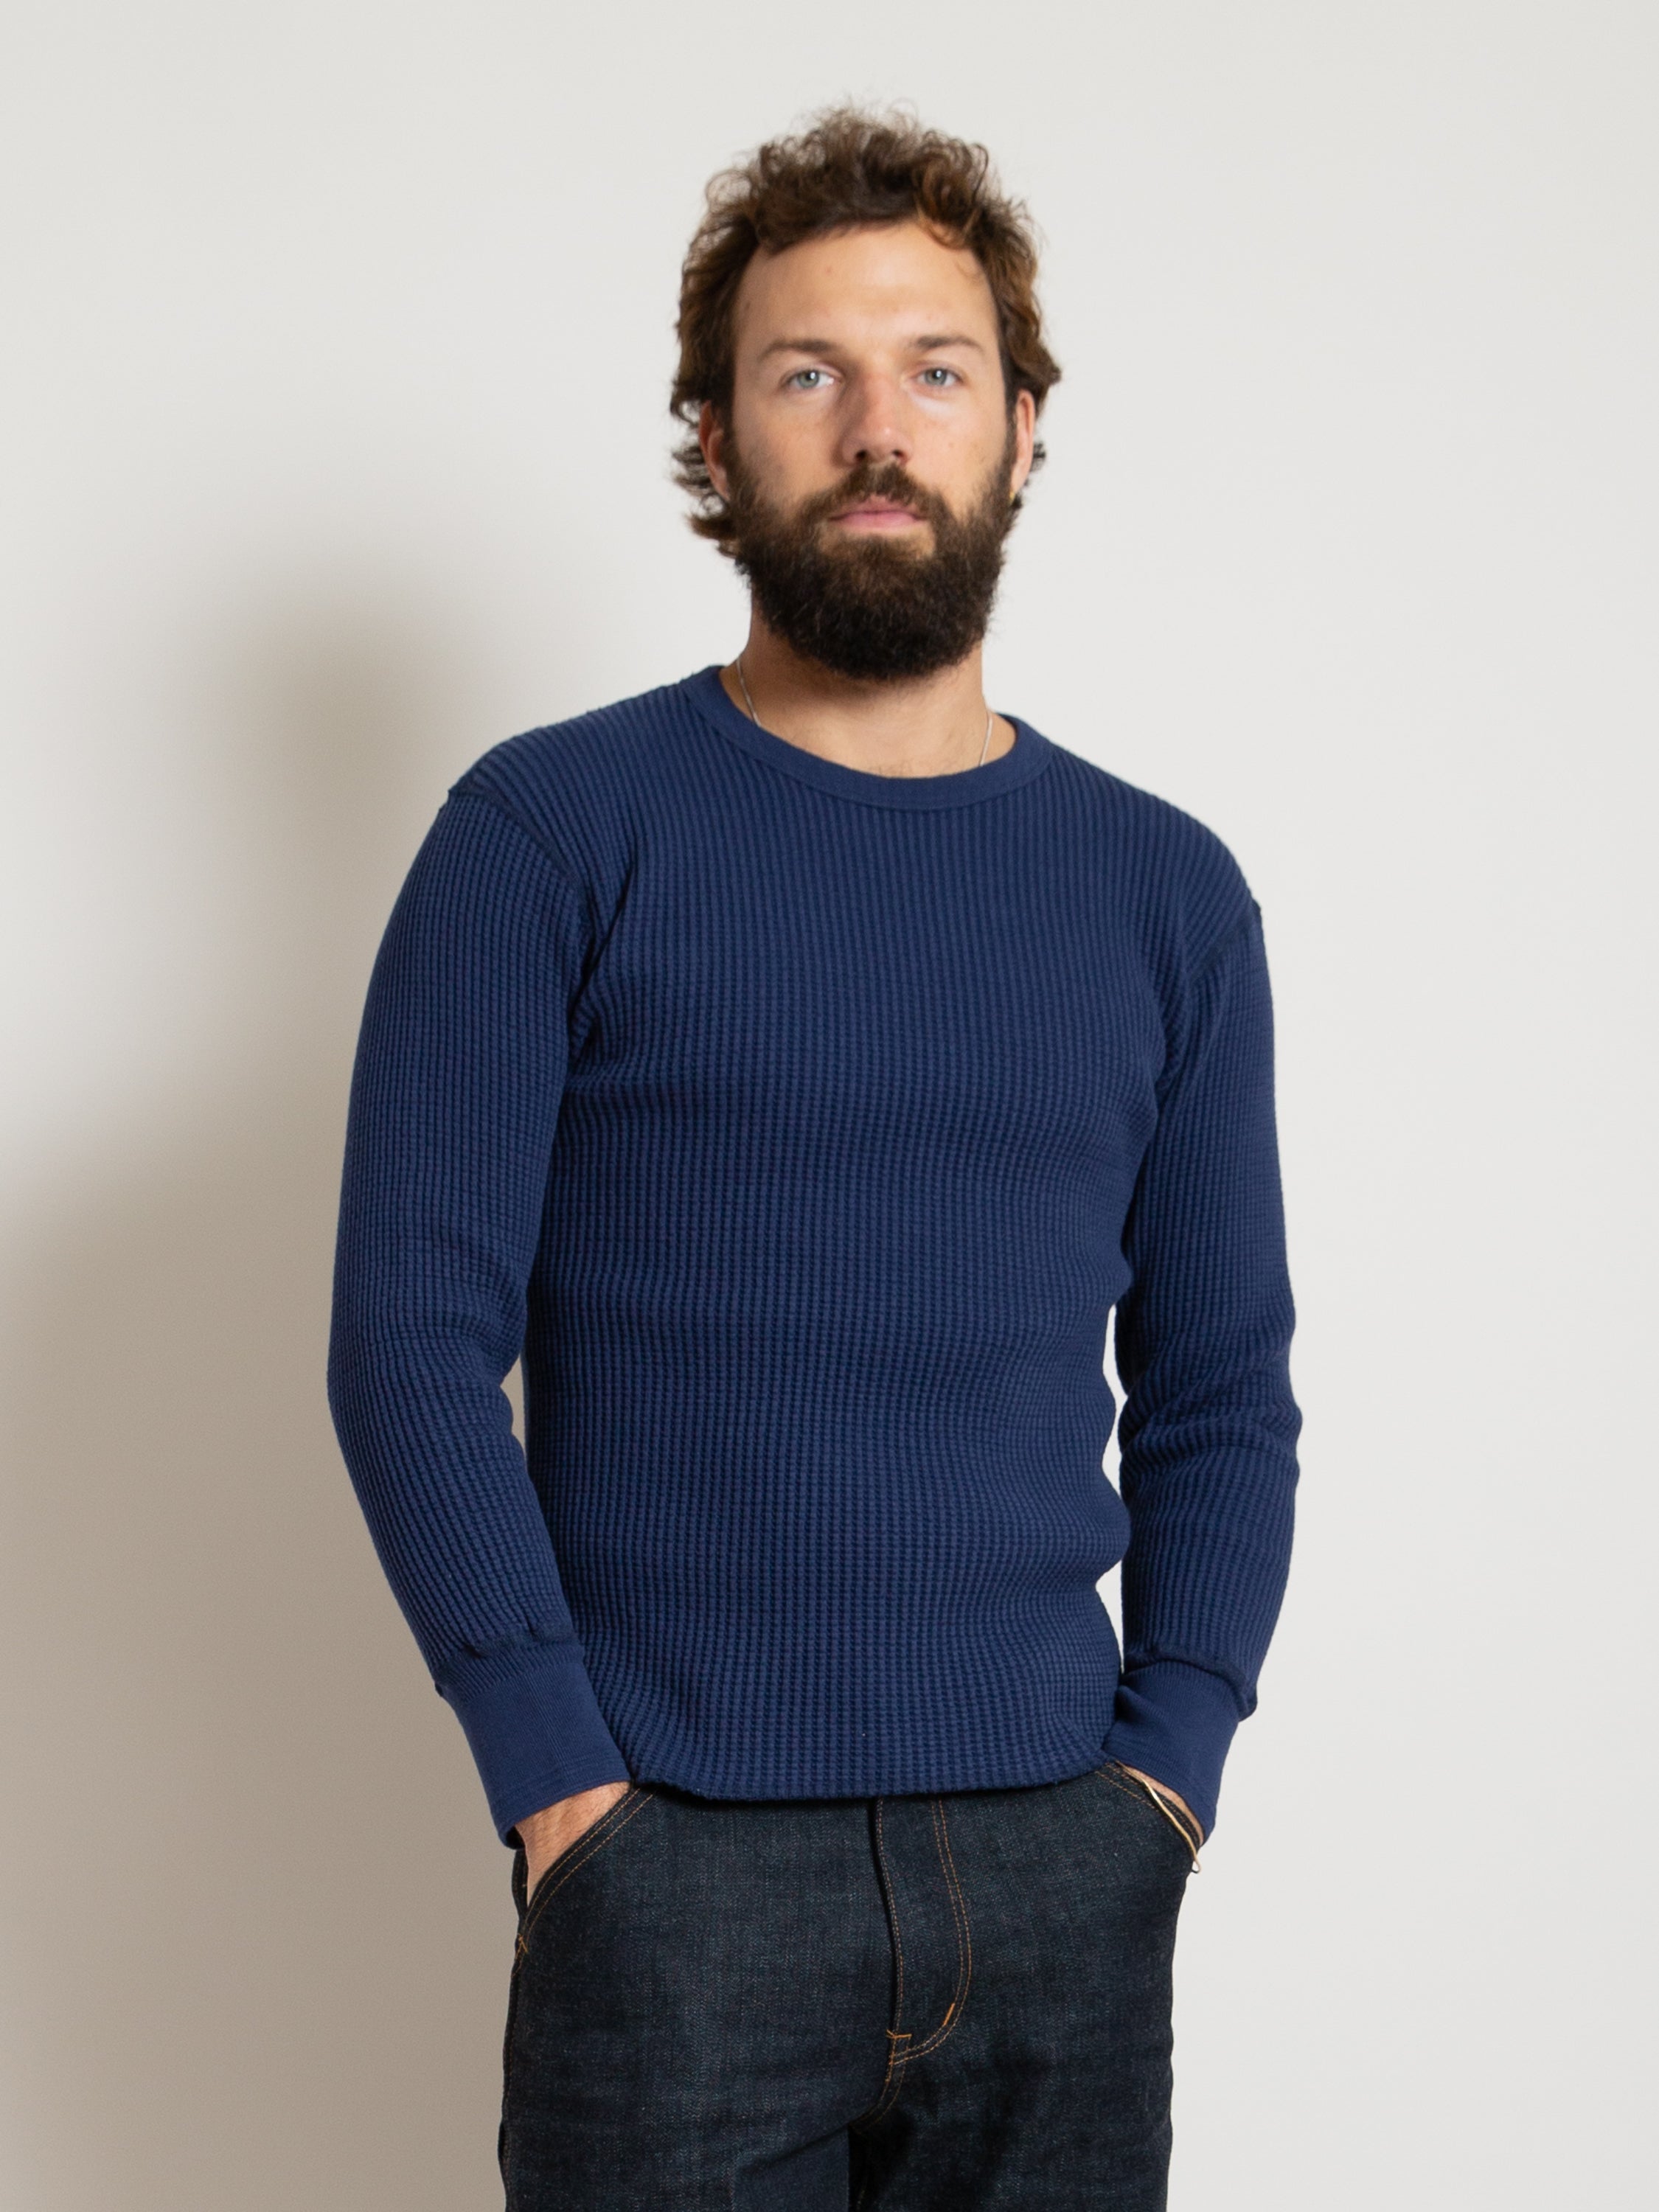 See Now, Buy Now: This Freemans Sporting Club Thermal Shirt is the Best  Winter Base Layer